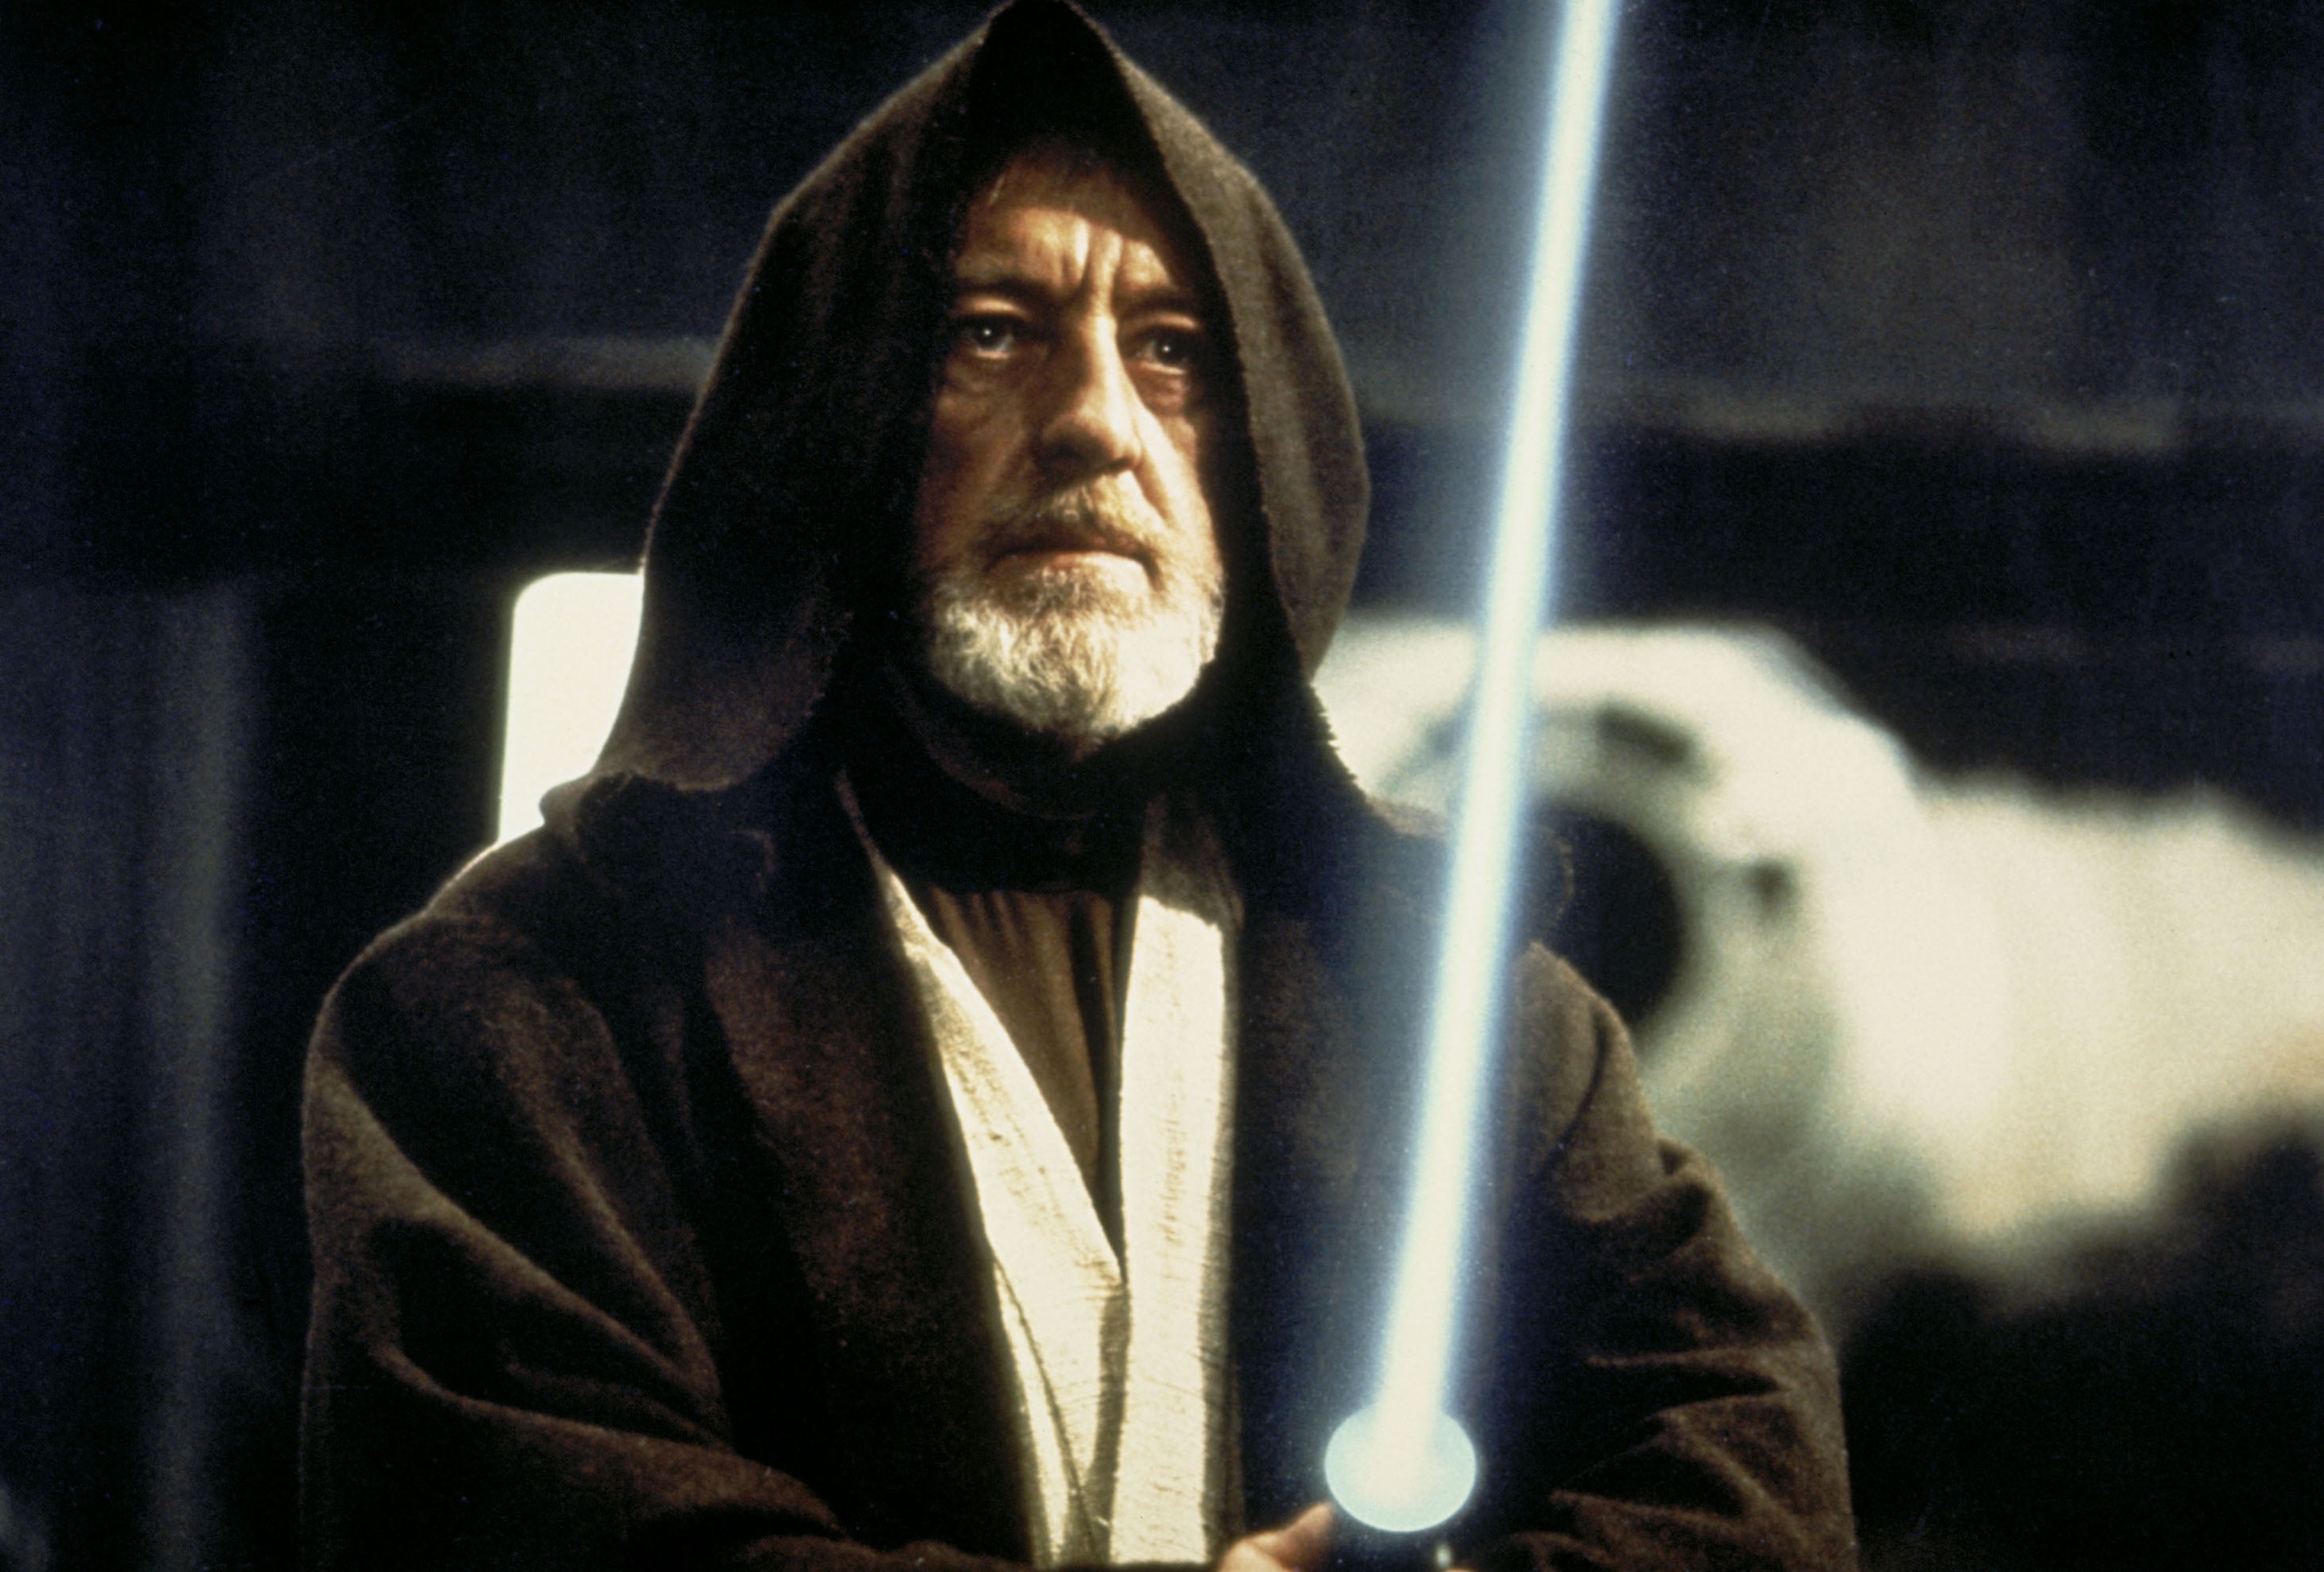 The Obi-Wan actor described filming Star Wars as ‘tedious'